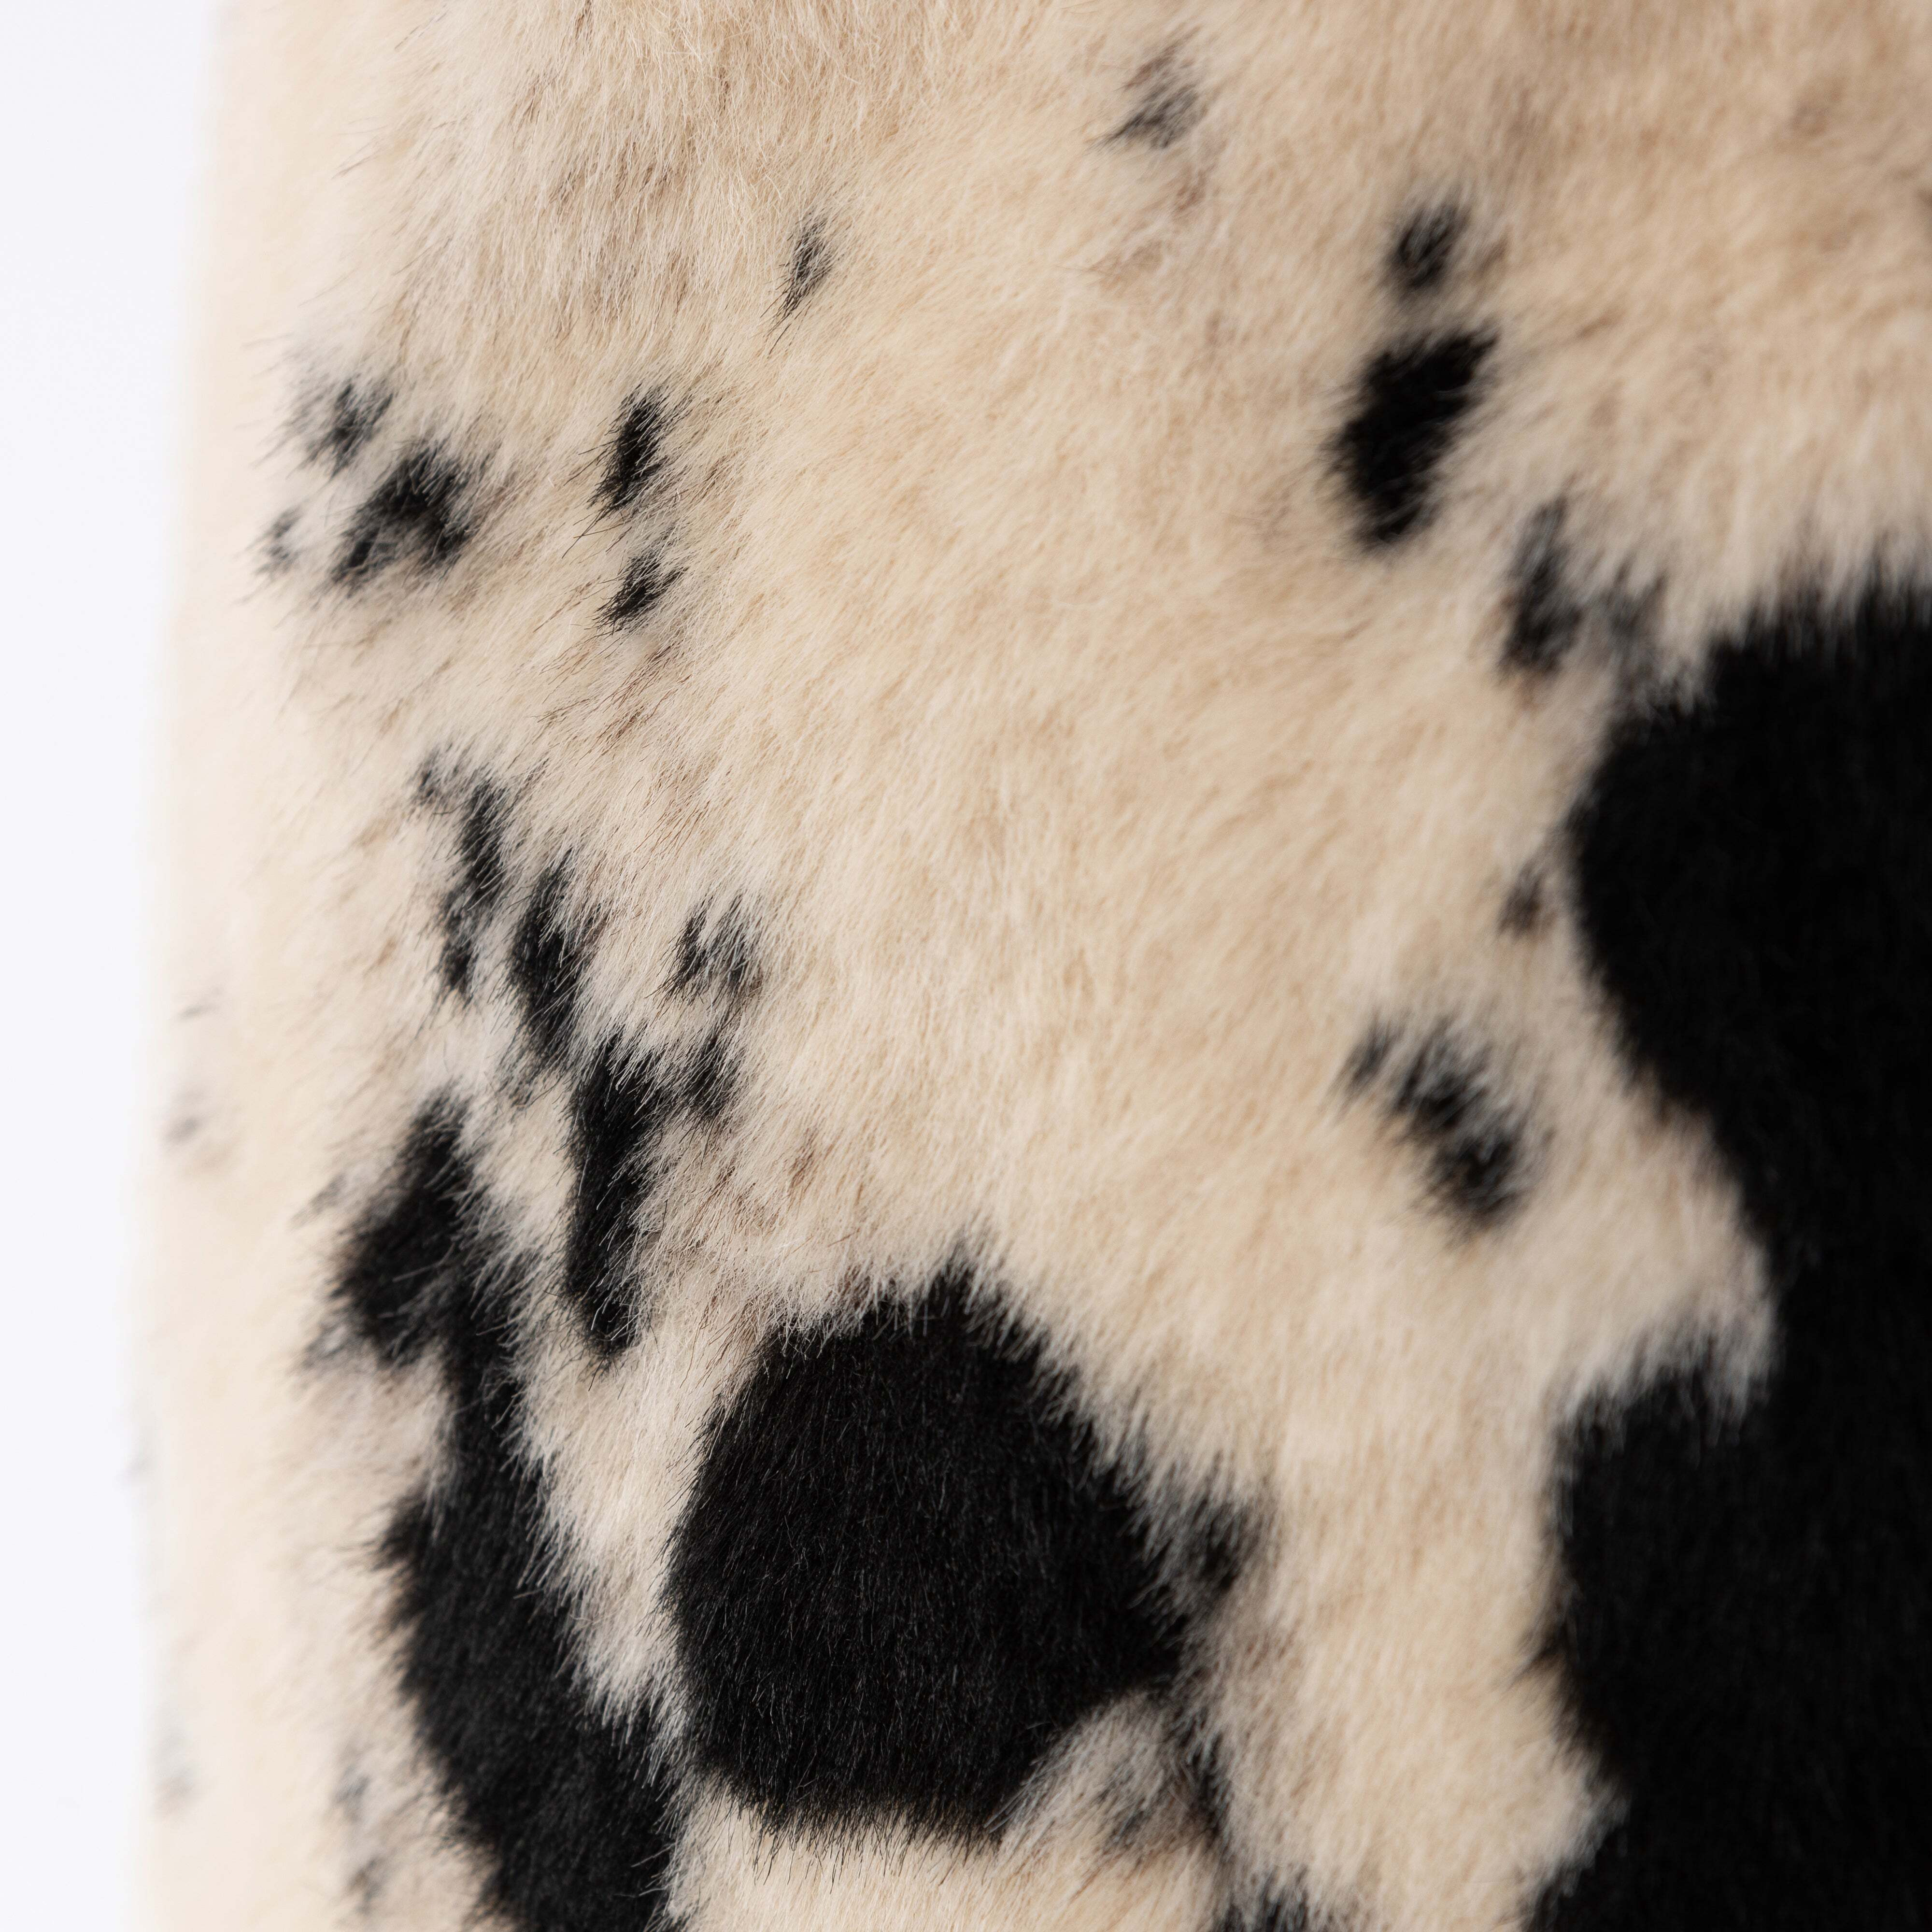 cowhide fabric - Google Search  Cowhide fabric, Faux cowhide, Cow print  fabric